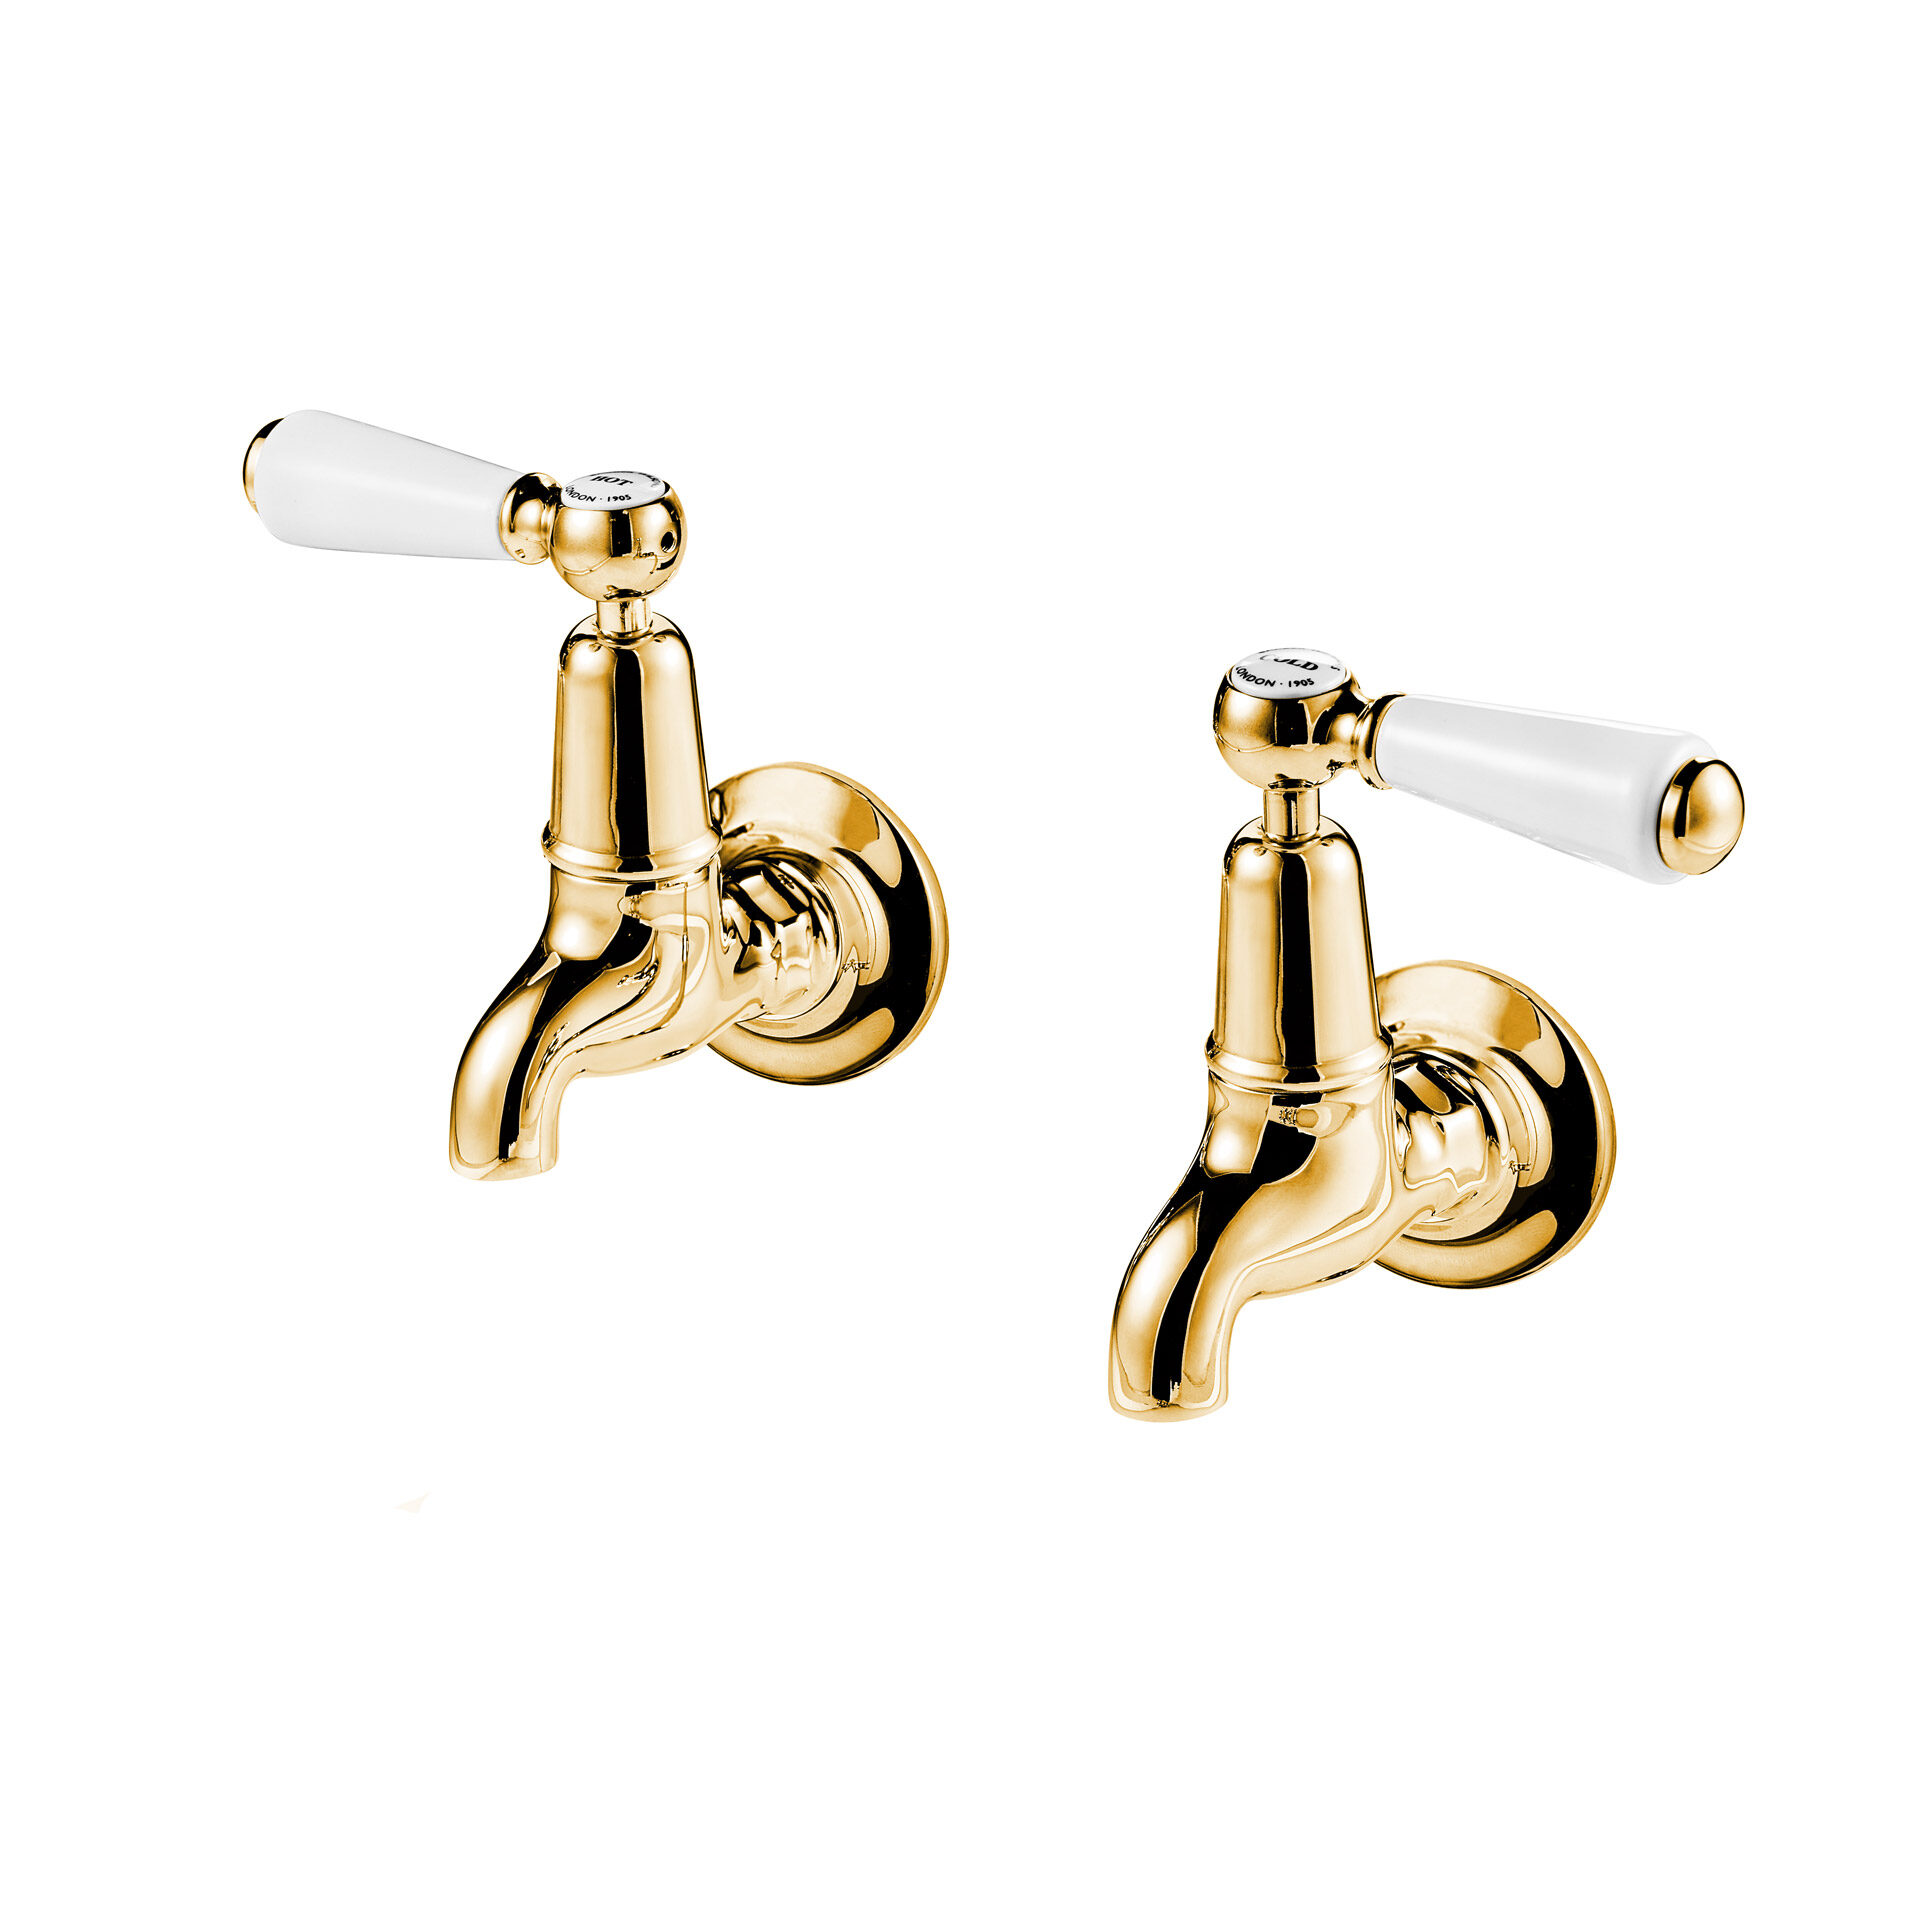 1900’s style wall mounted bib taps with ceramic lever handle in polished brass